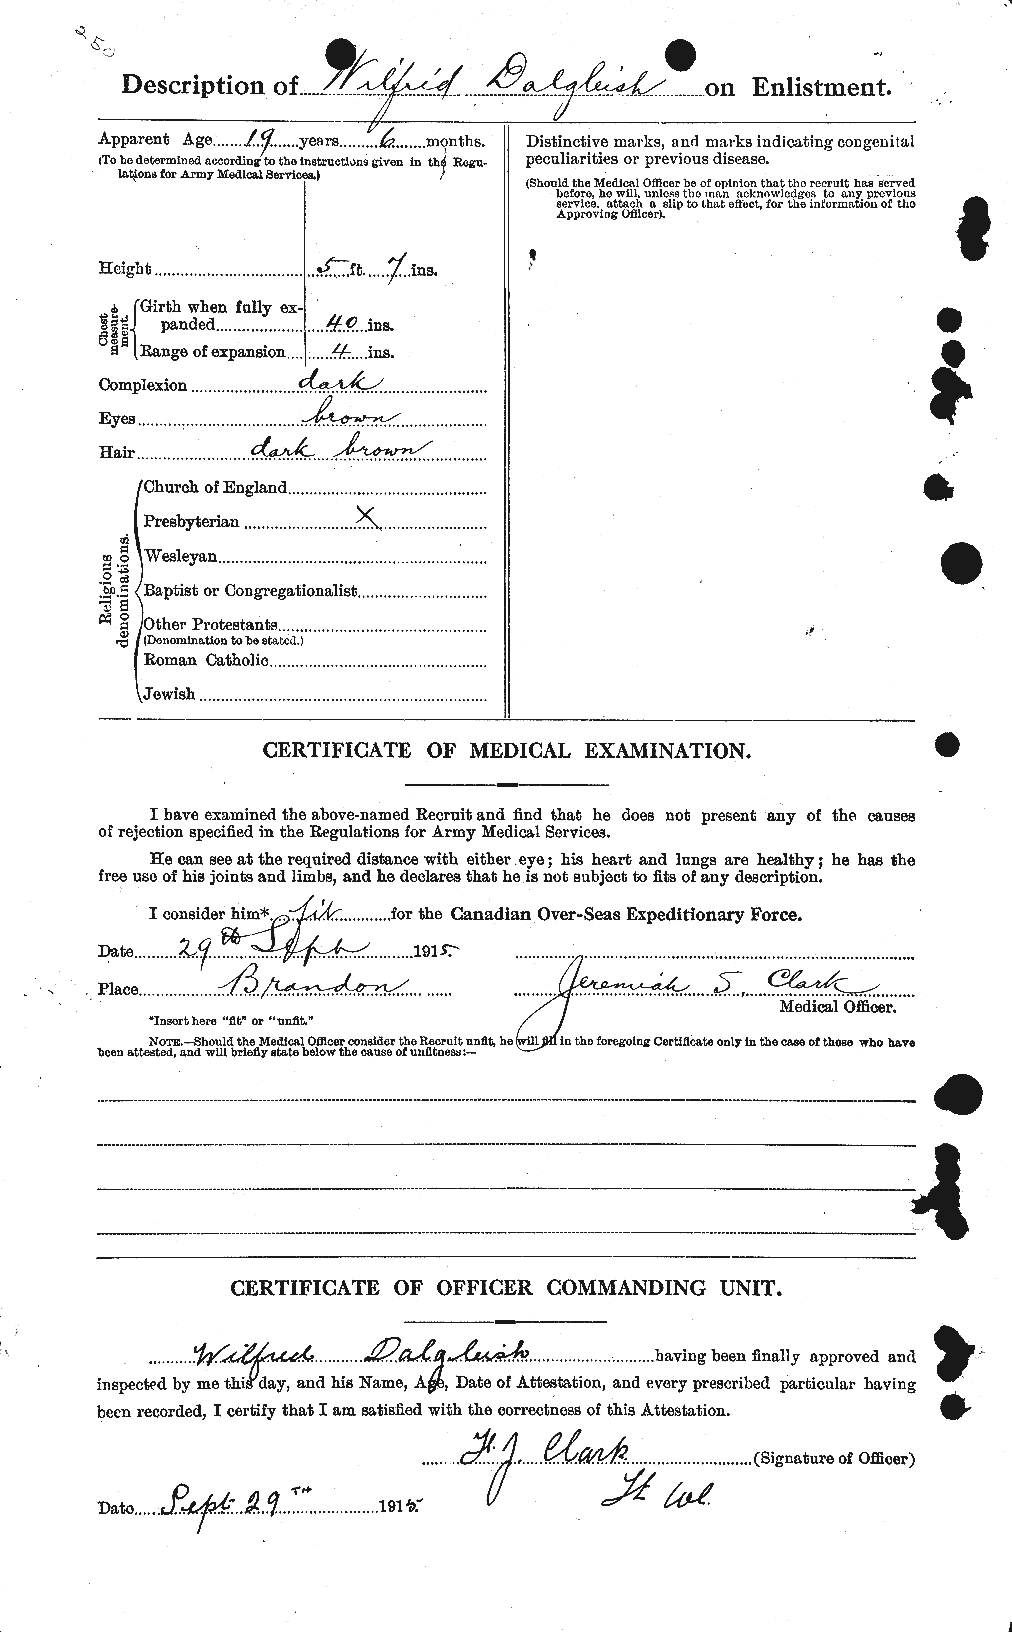 Personnel Records of the First World War - CEF 277450b